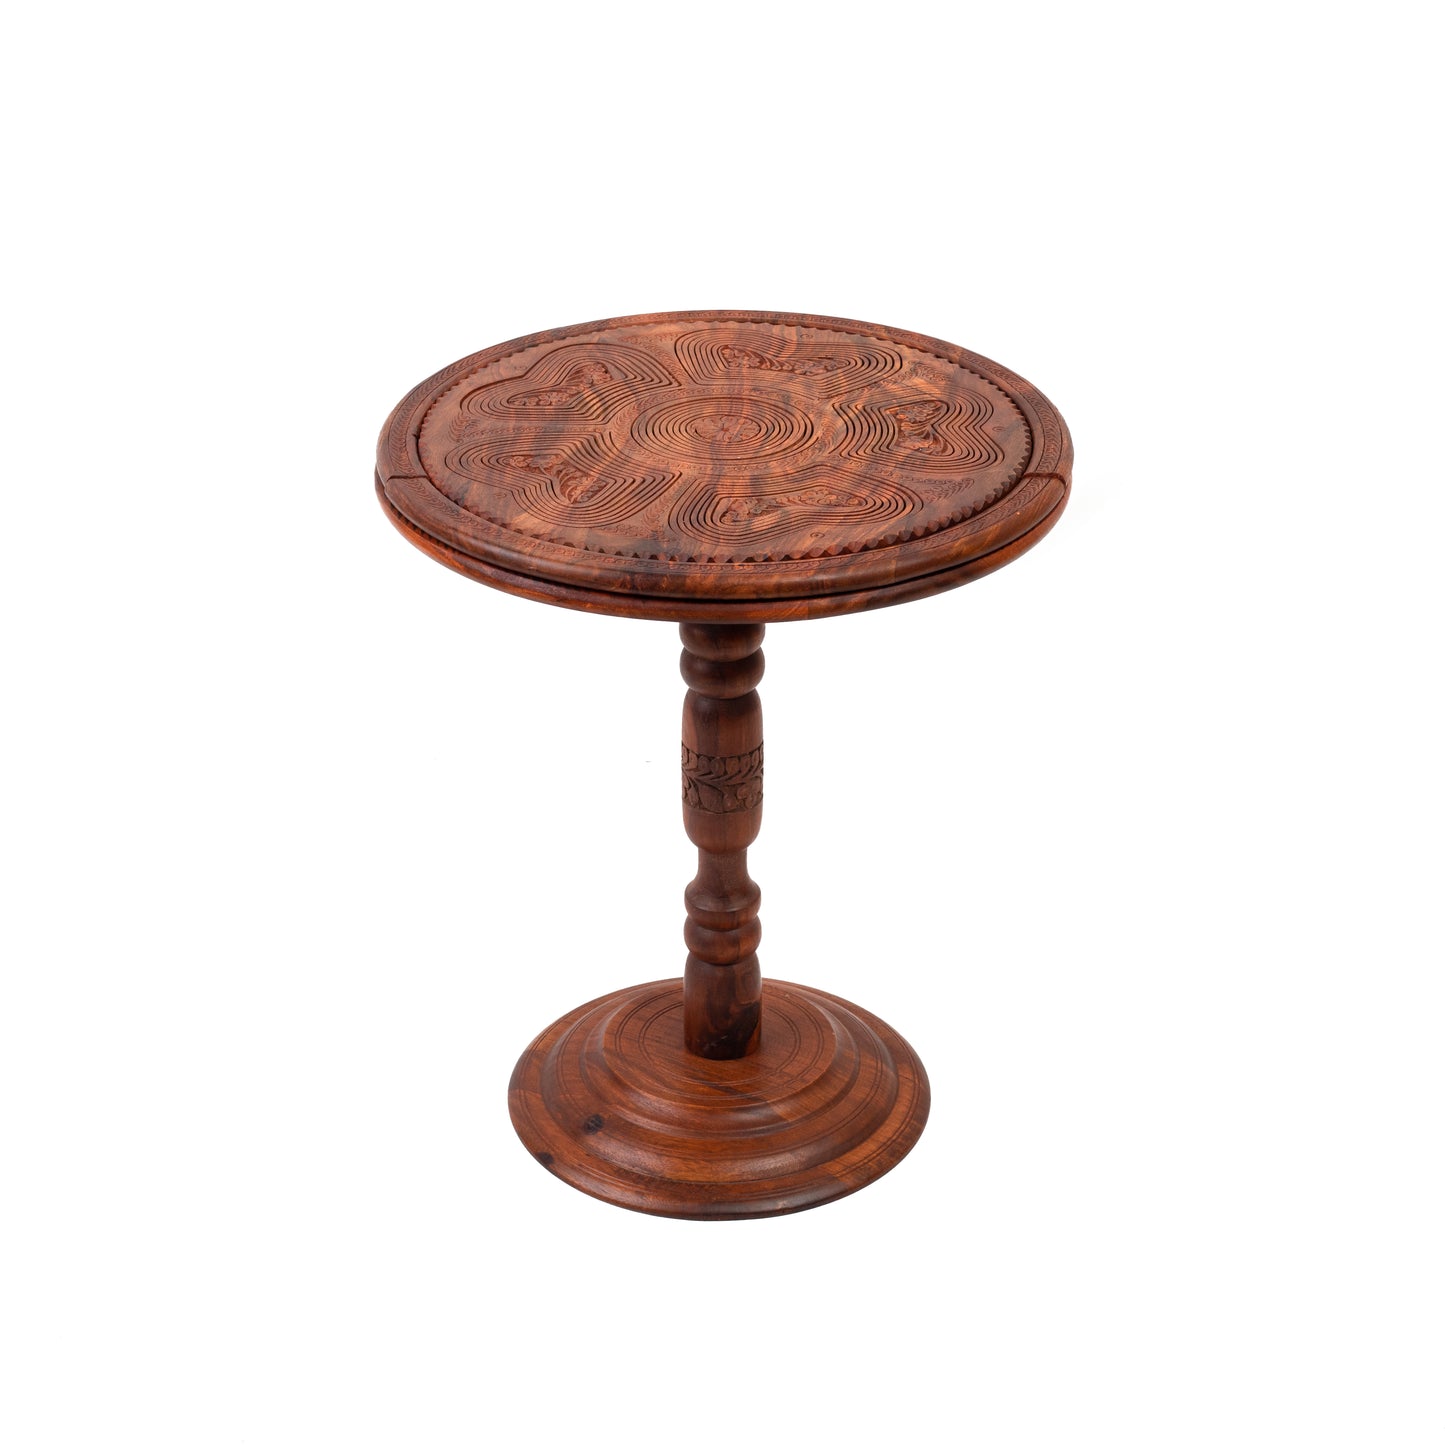 Handcrafted three in one wooden sidetable